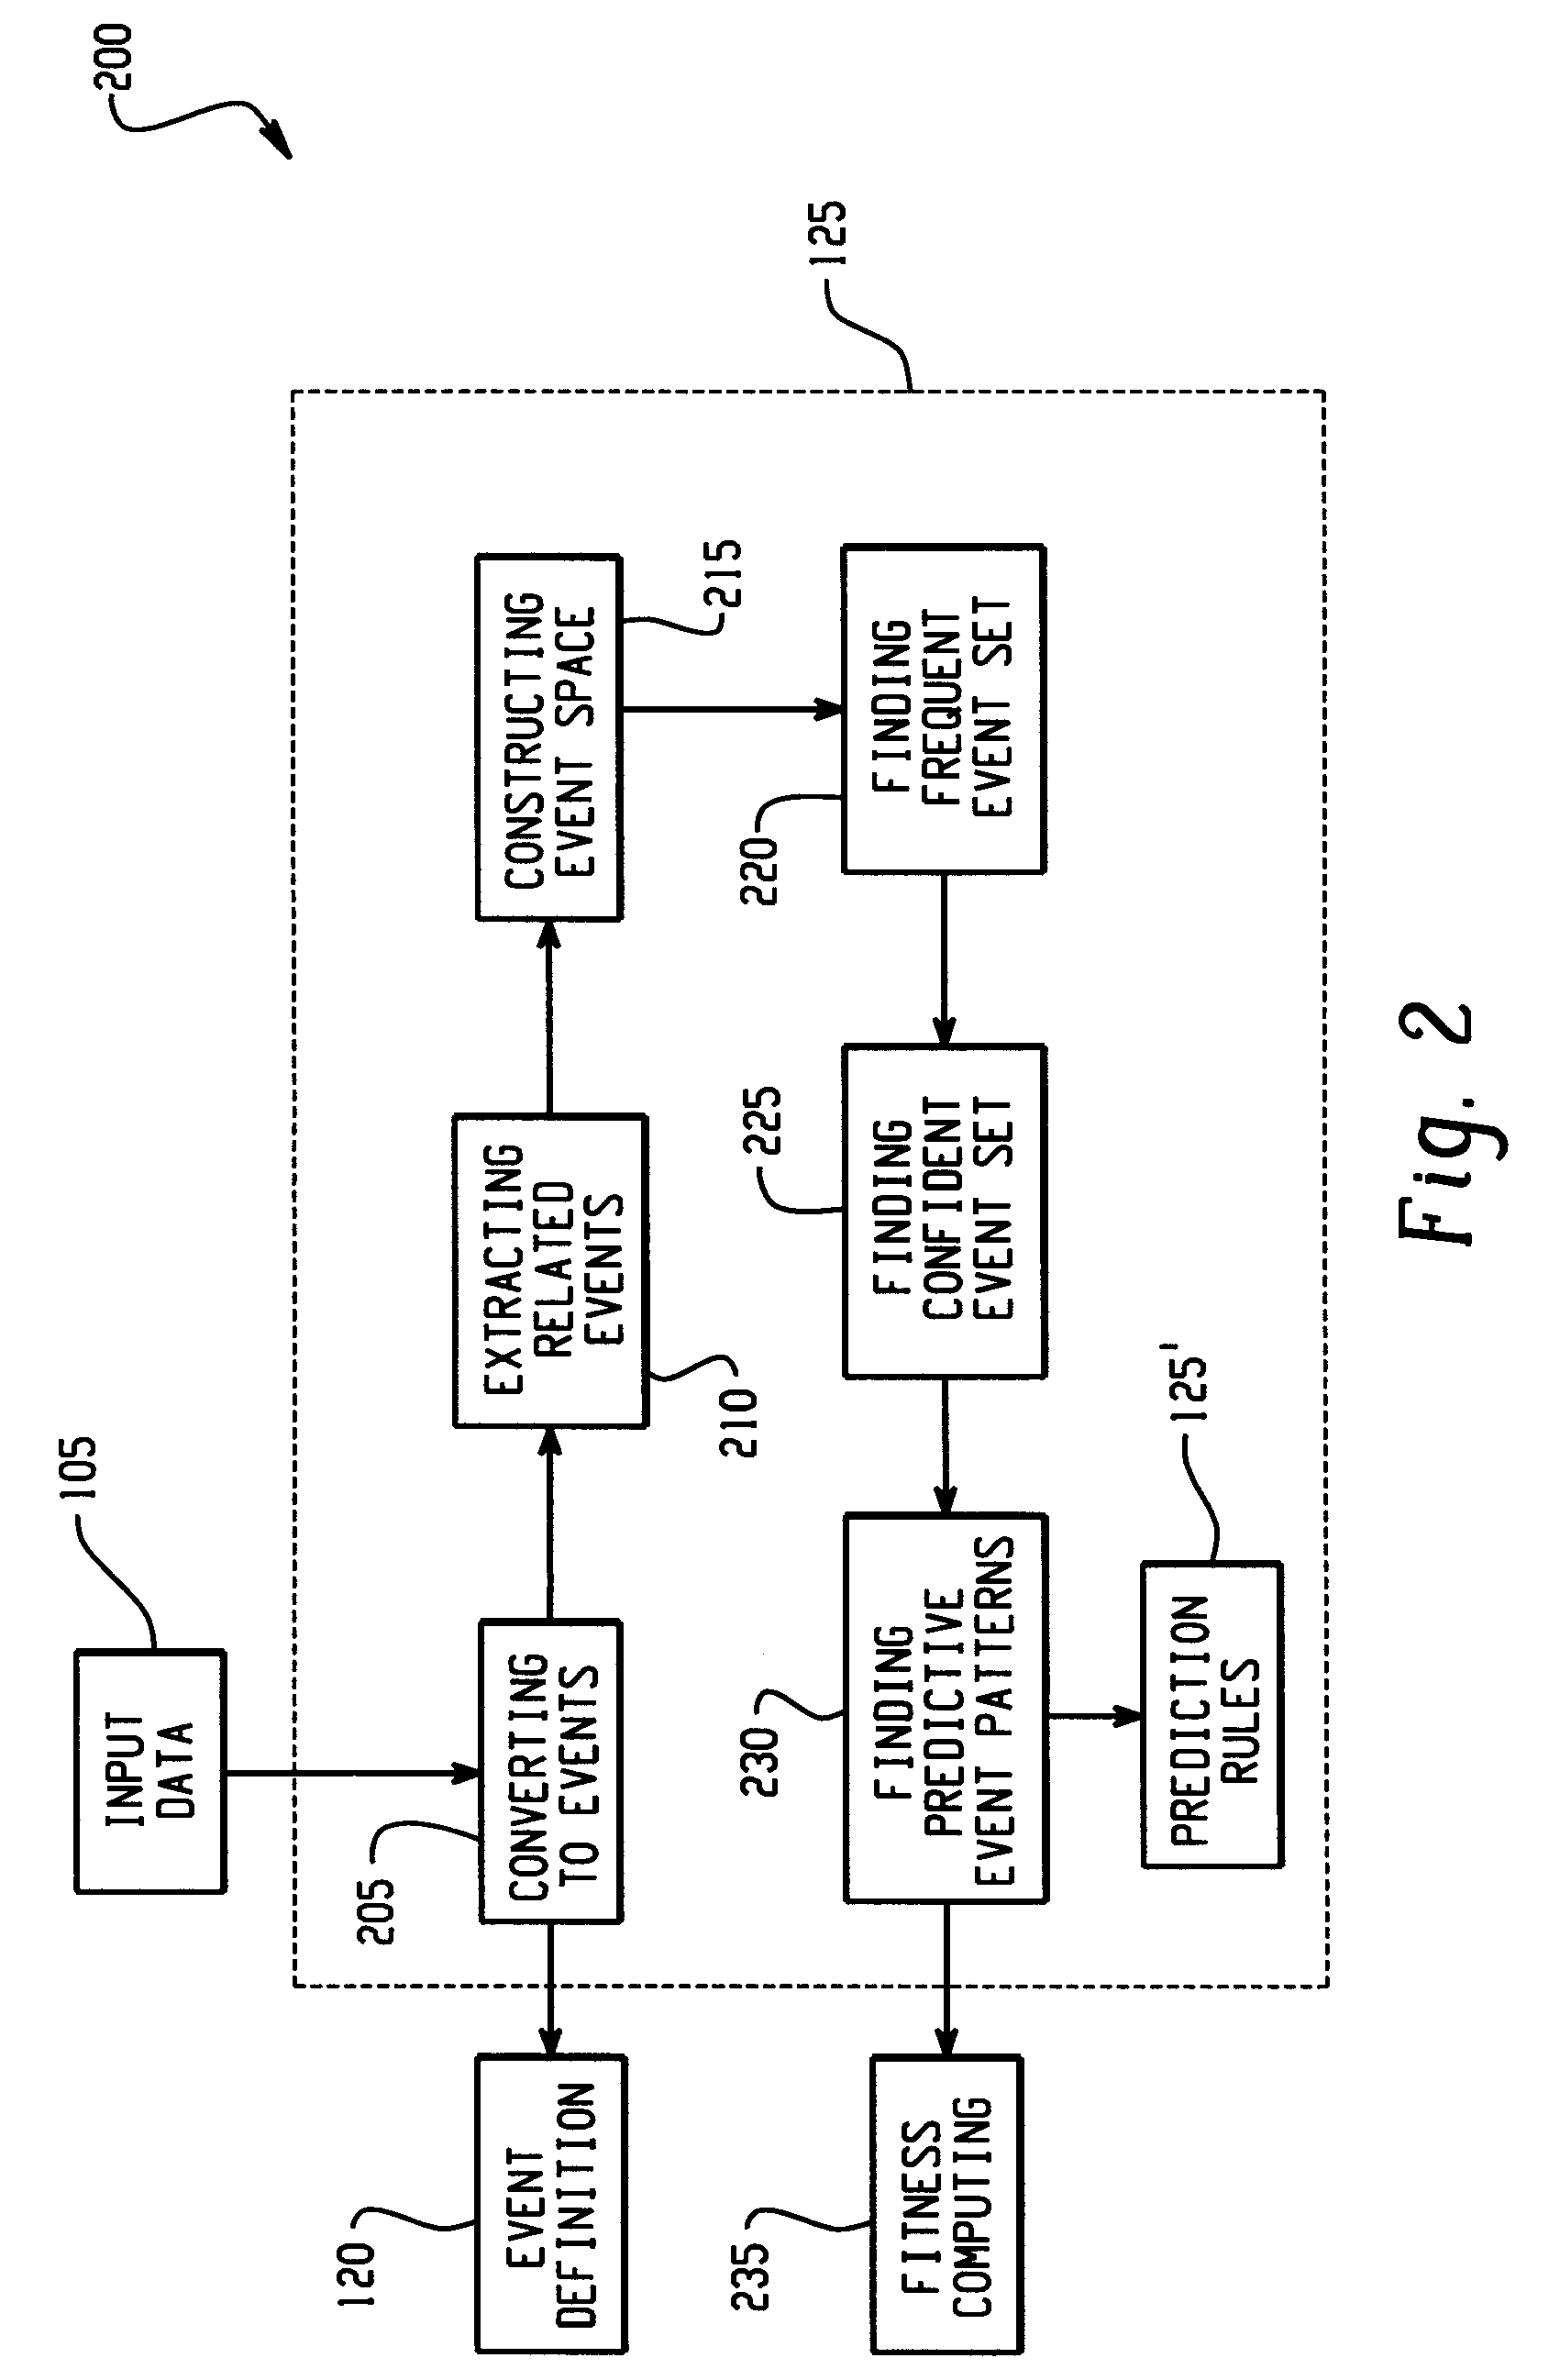 Method for characterization, detection and prediction for target events